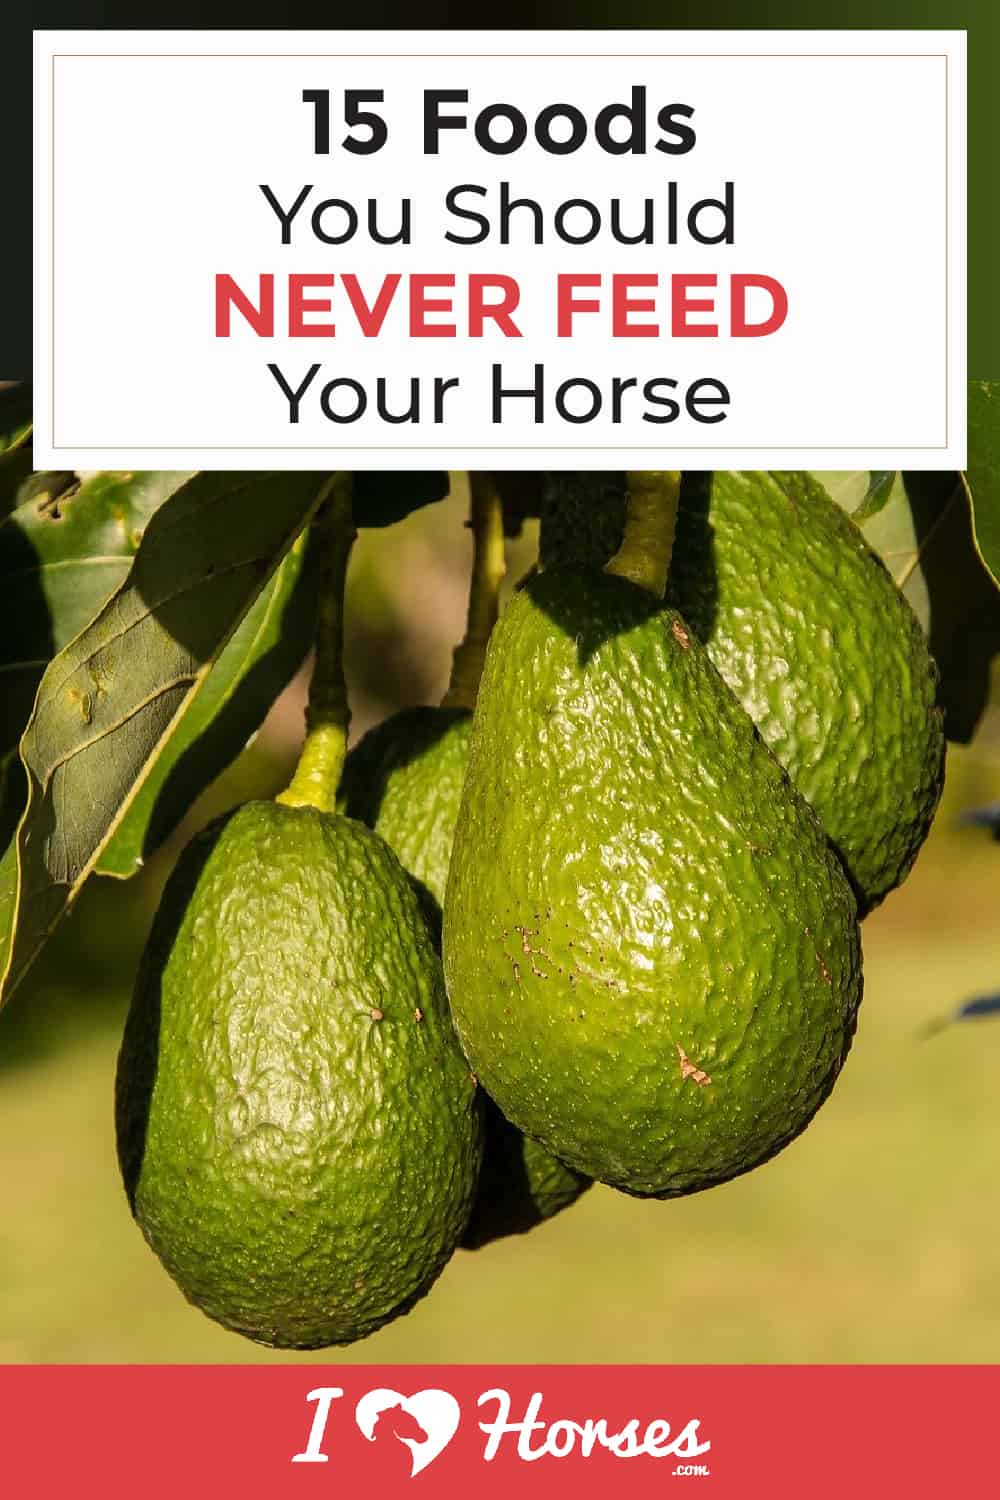 15 Foods You Should Never Feed Your Horse